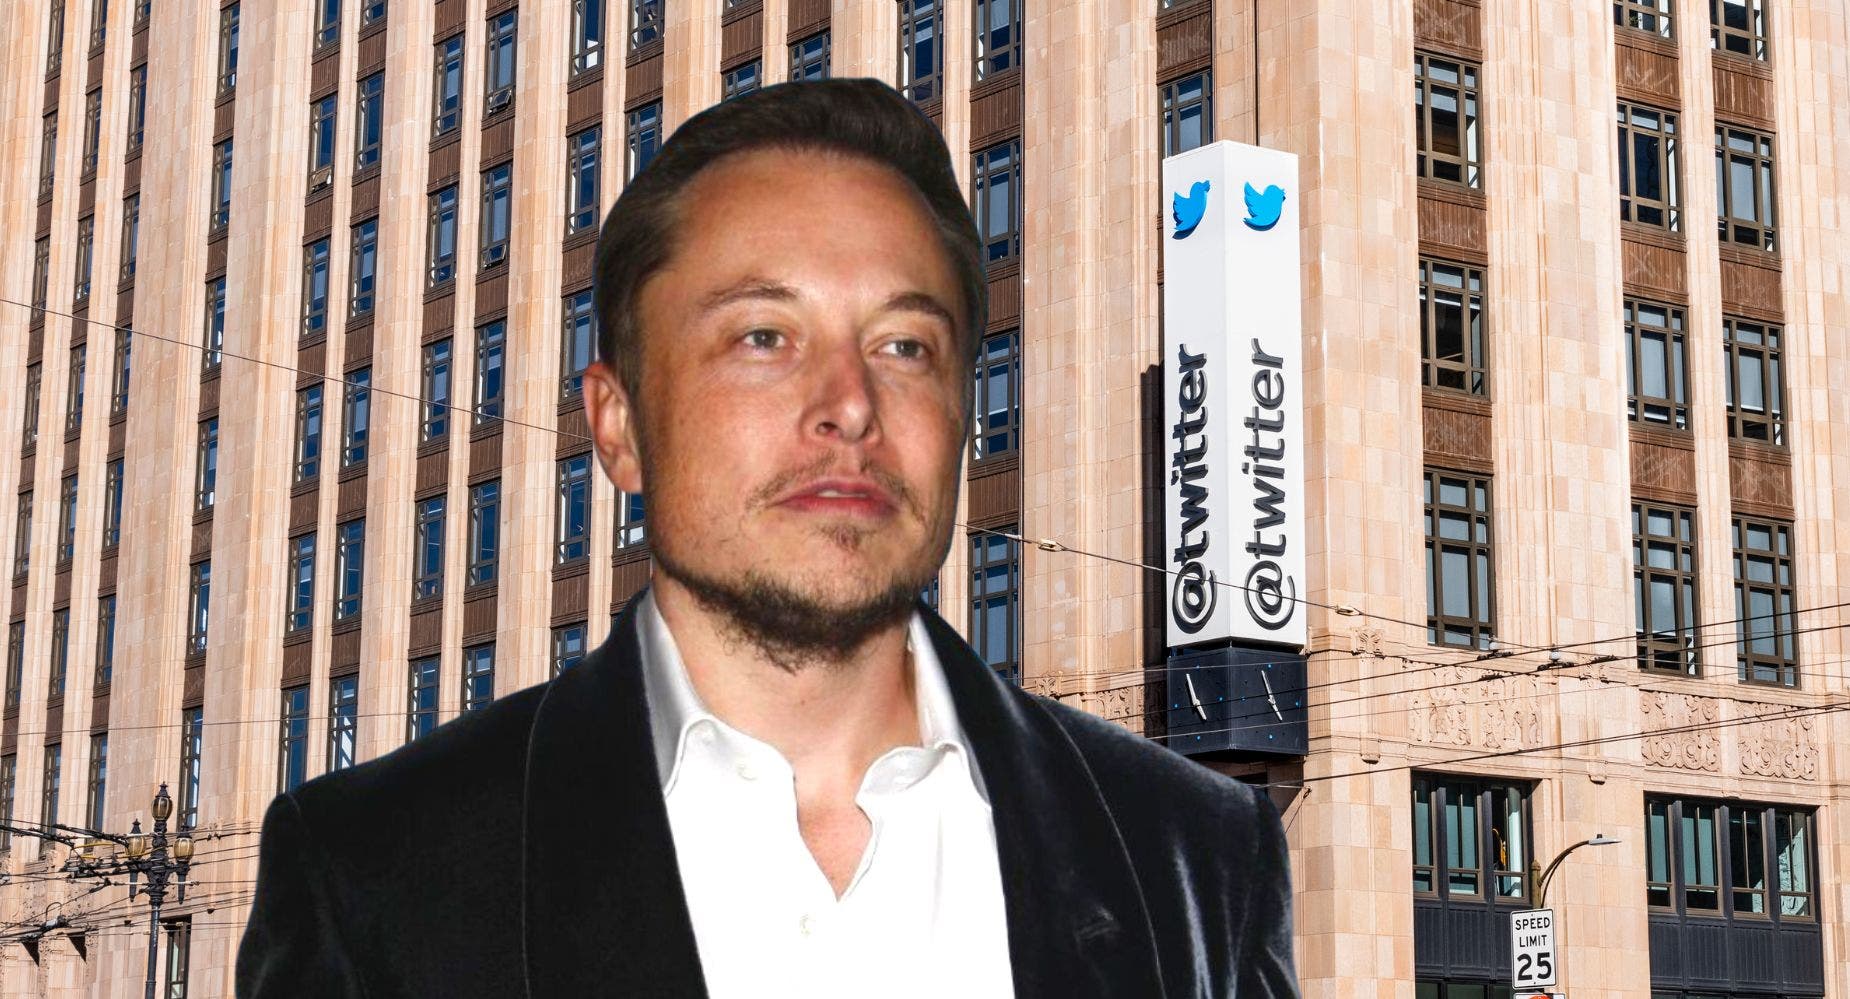 Twitter HQ's Landlord Sues Elon Musk For Not Paying Millions In Rent: Here's How Much He Owes